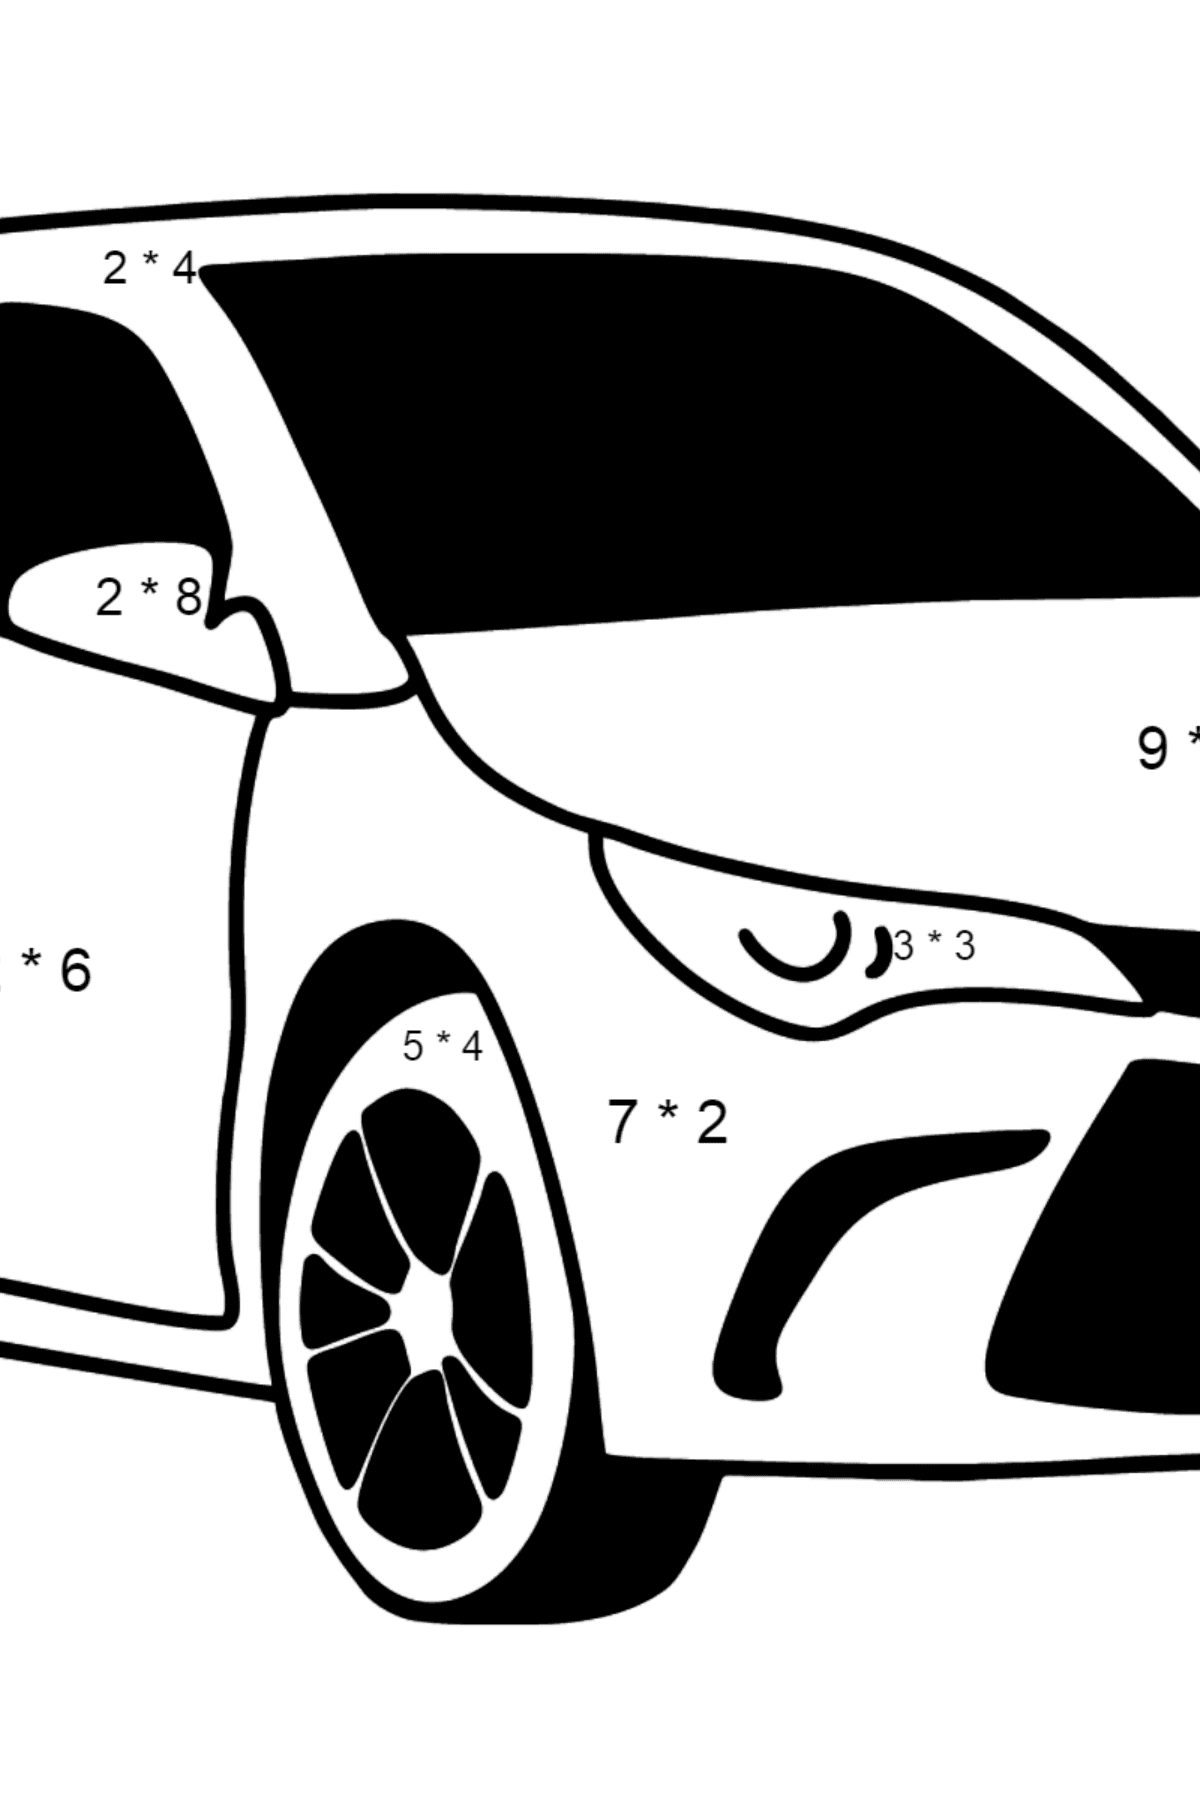 Toyota Camry coloring page - Math Coloring - Multiplication for Kids